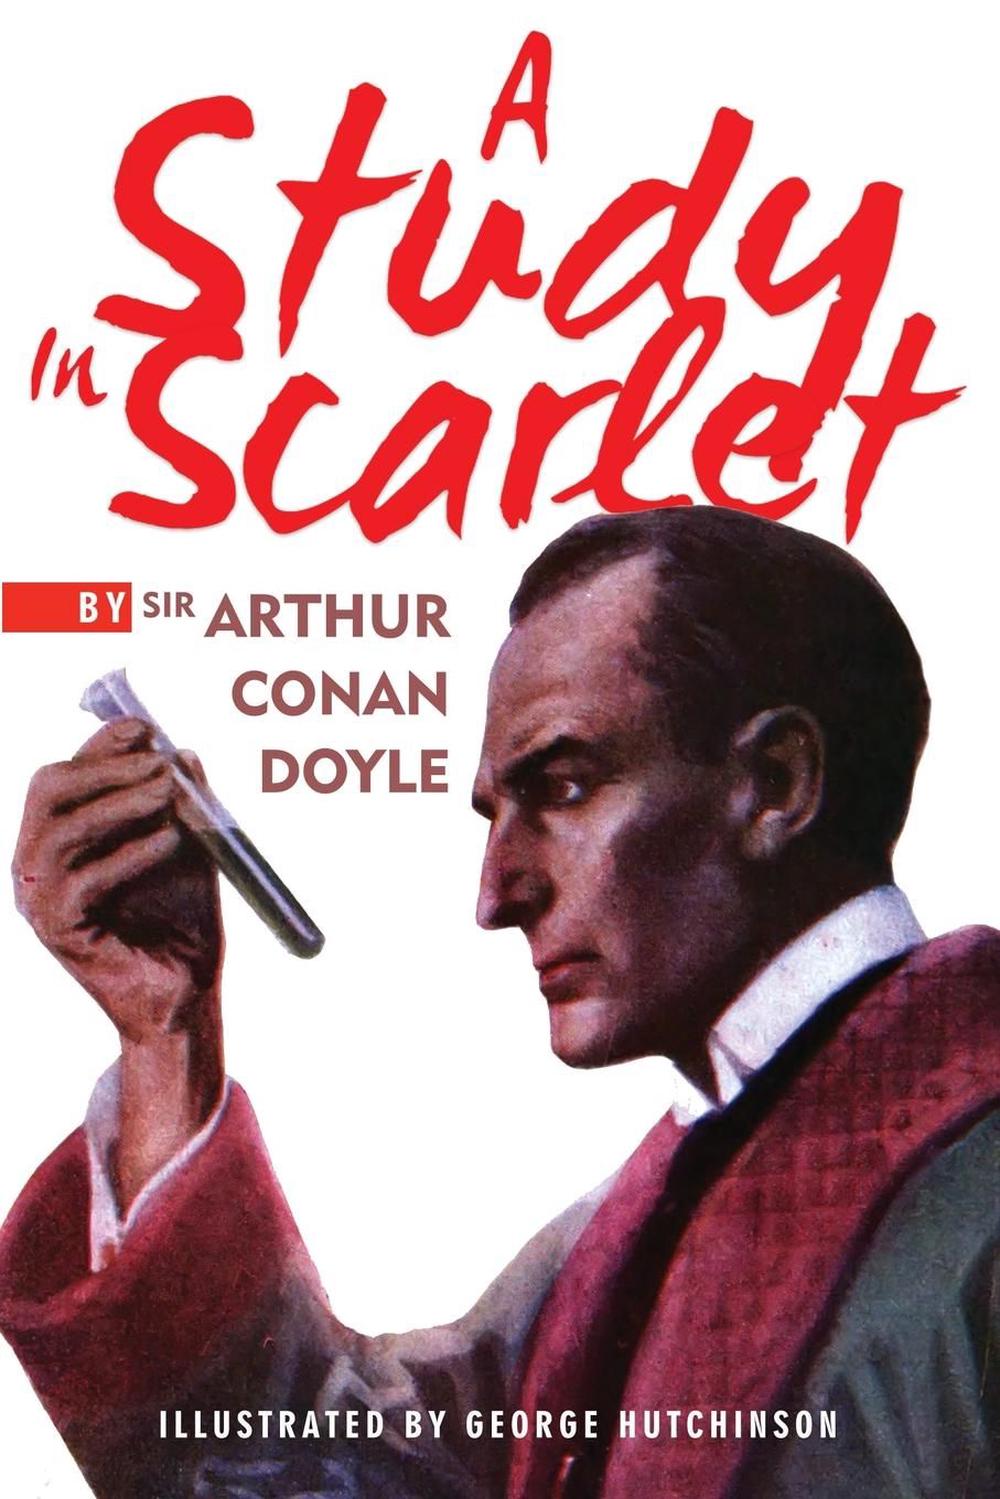 a study in scarlet book cover